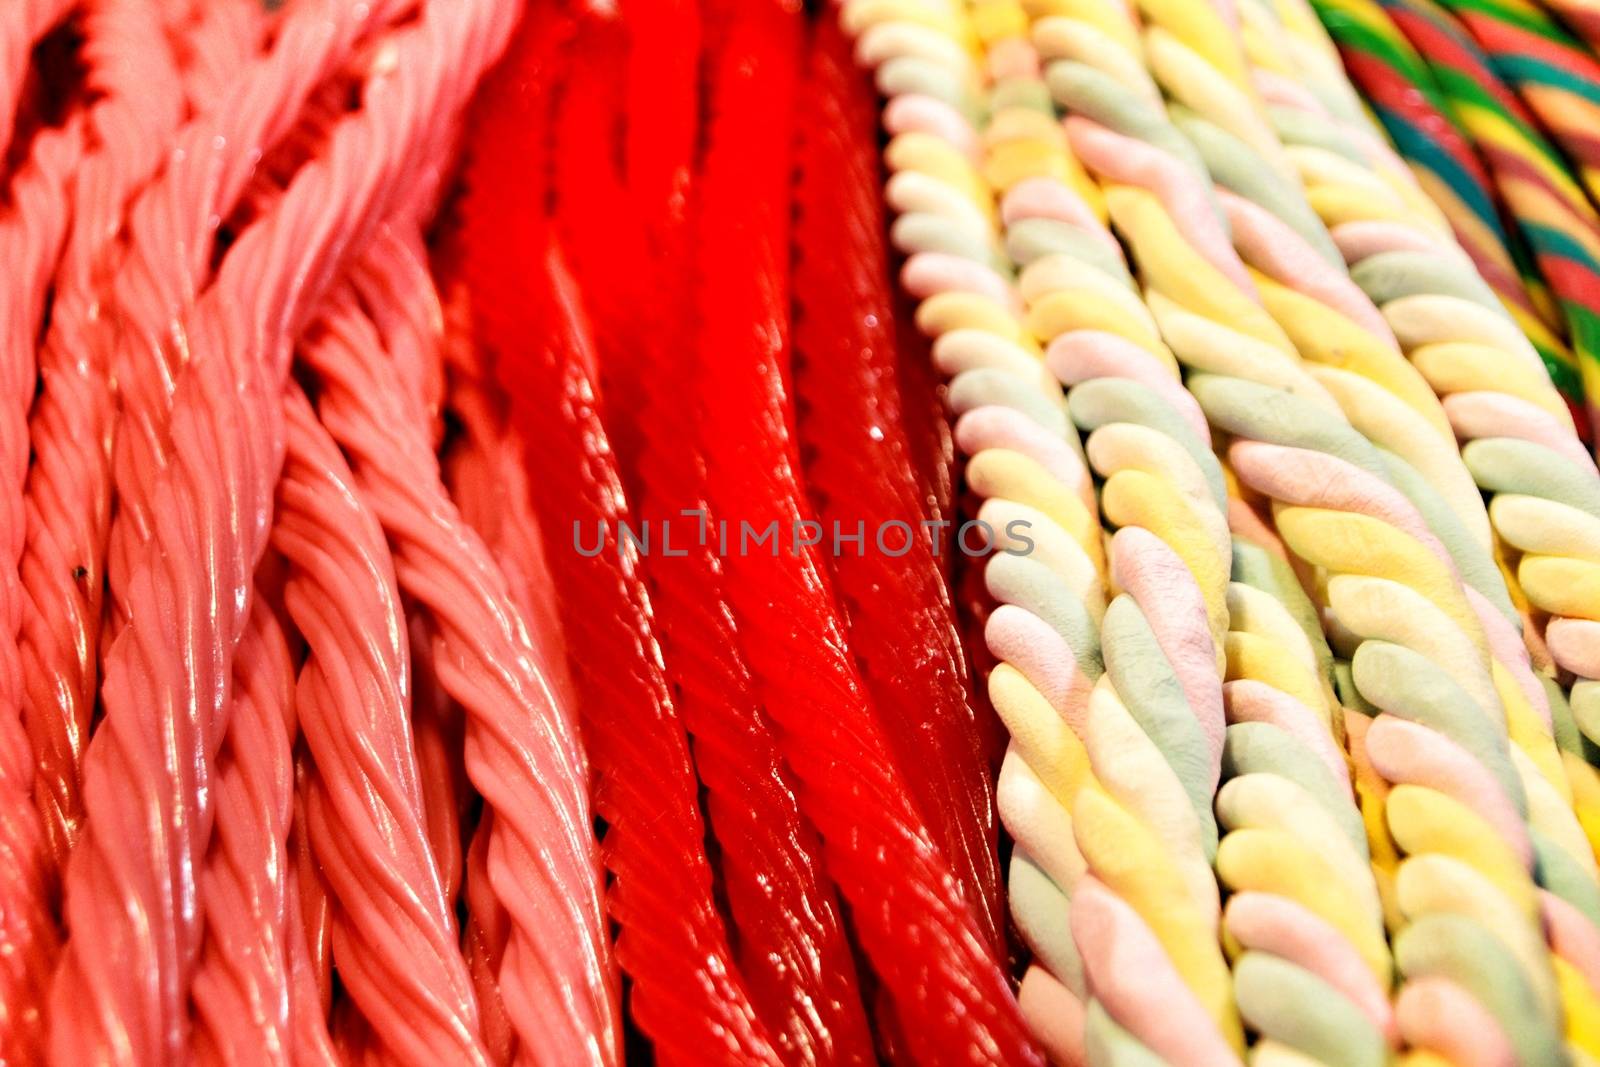 Tasty candies of various colors and flavors in a street stall in Elche